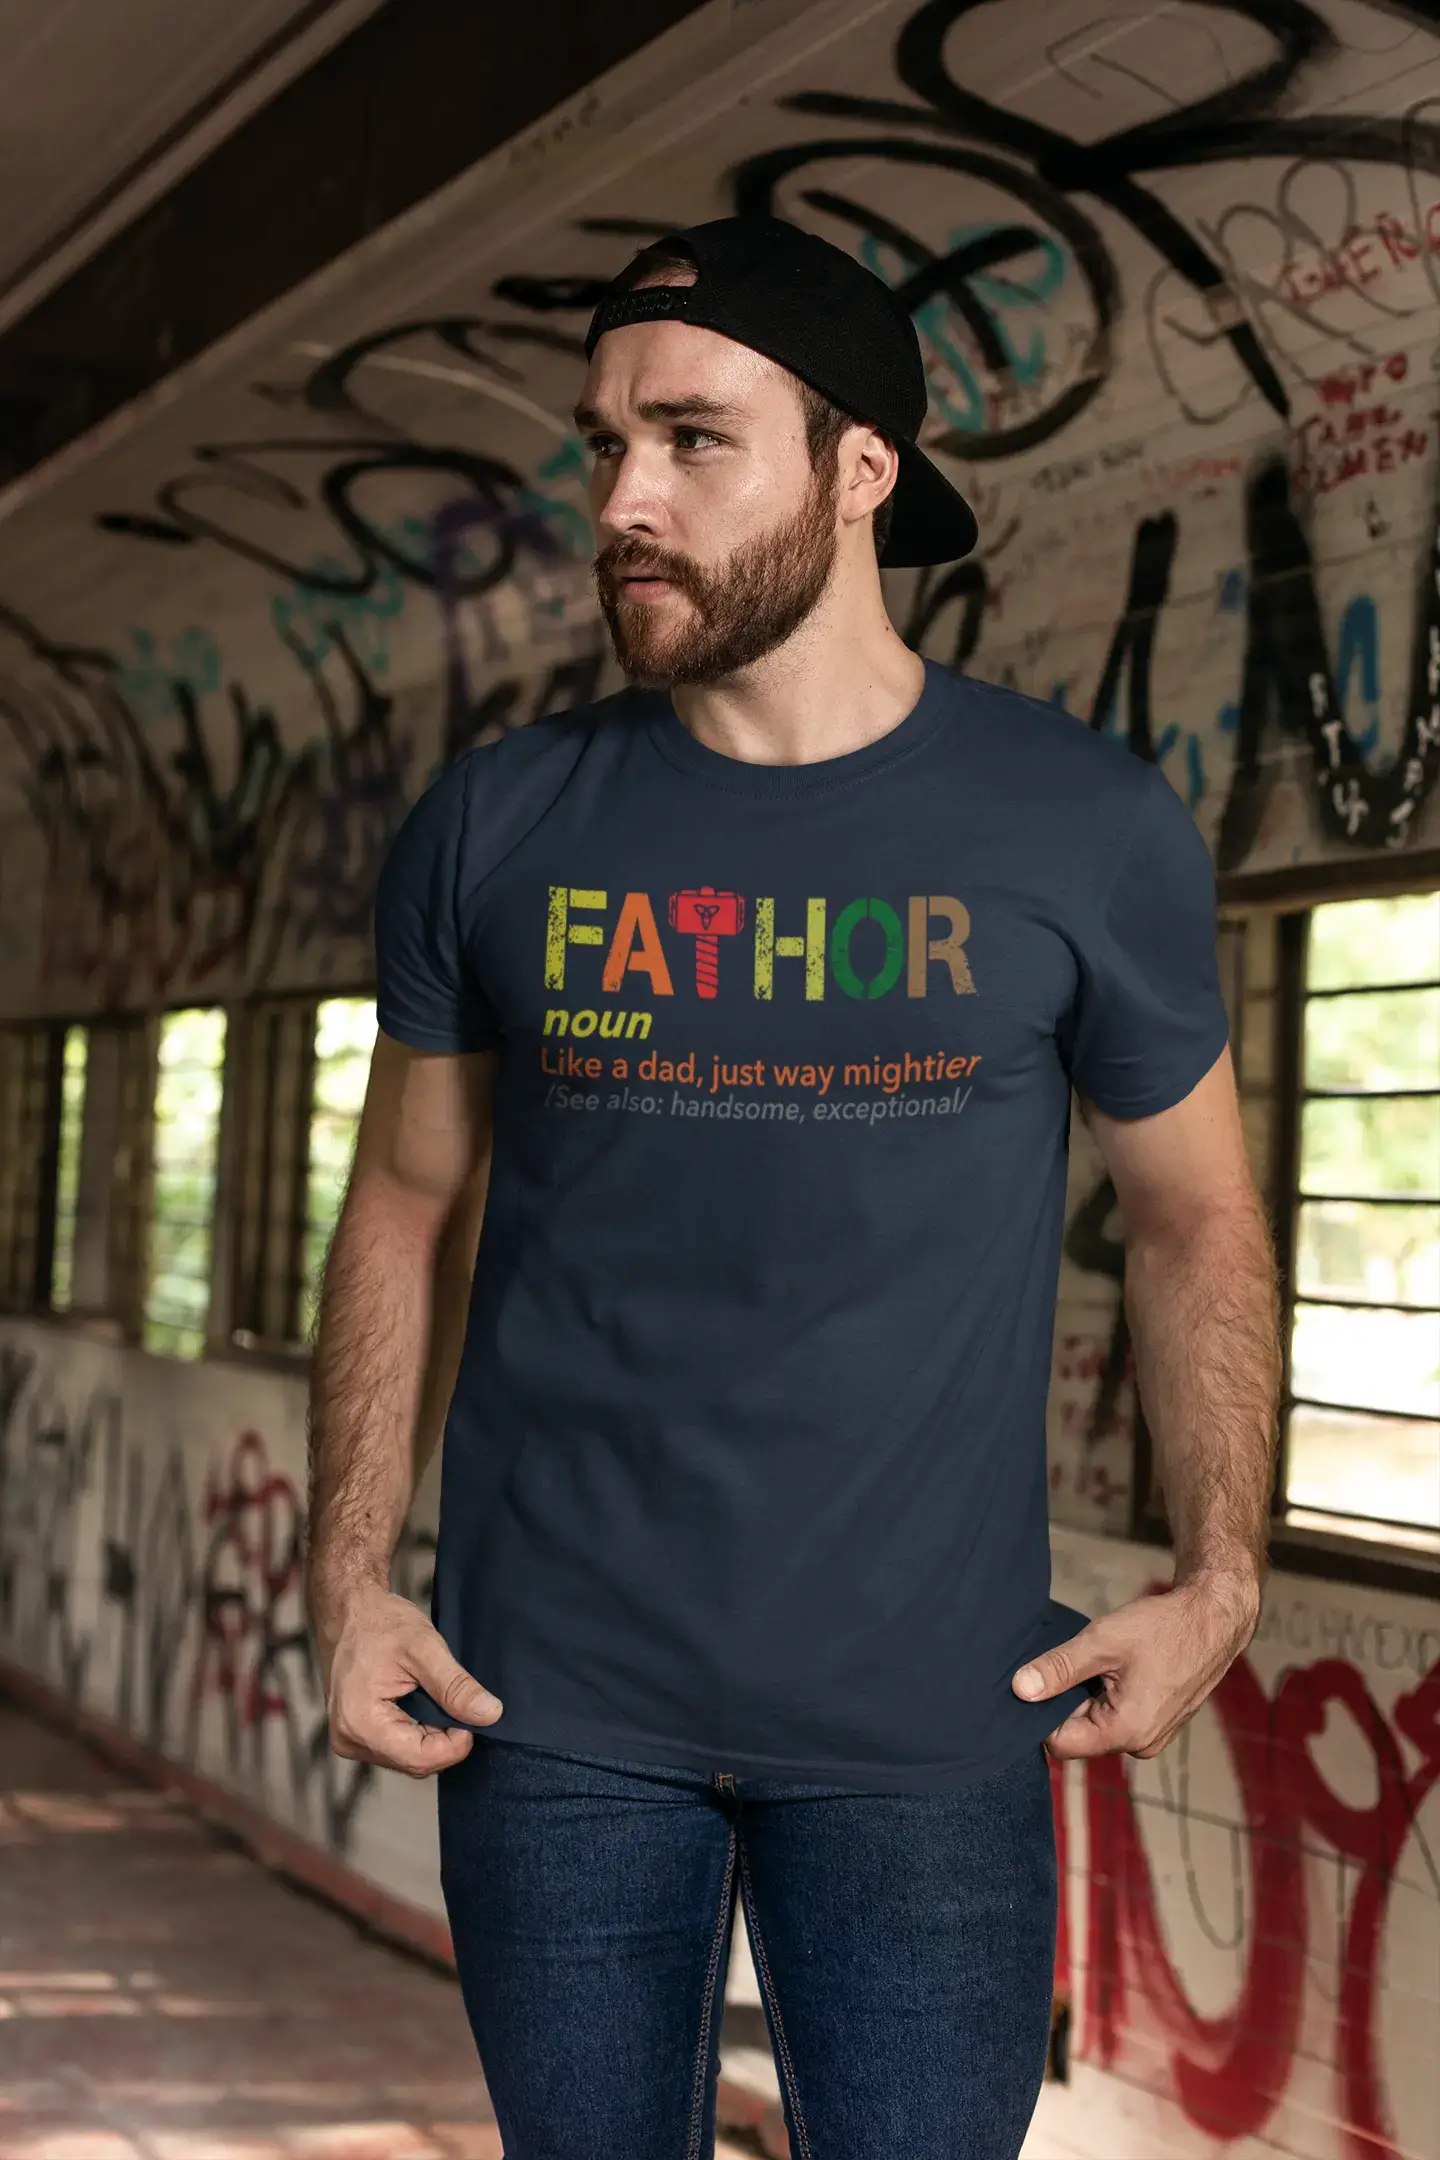 ULTRABASIC - Graphic Men's Fa-Thor Like Dad Just Way Mightier Shirt Printed Letters Denim